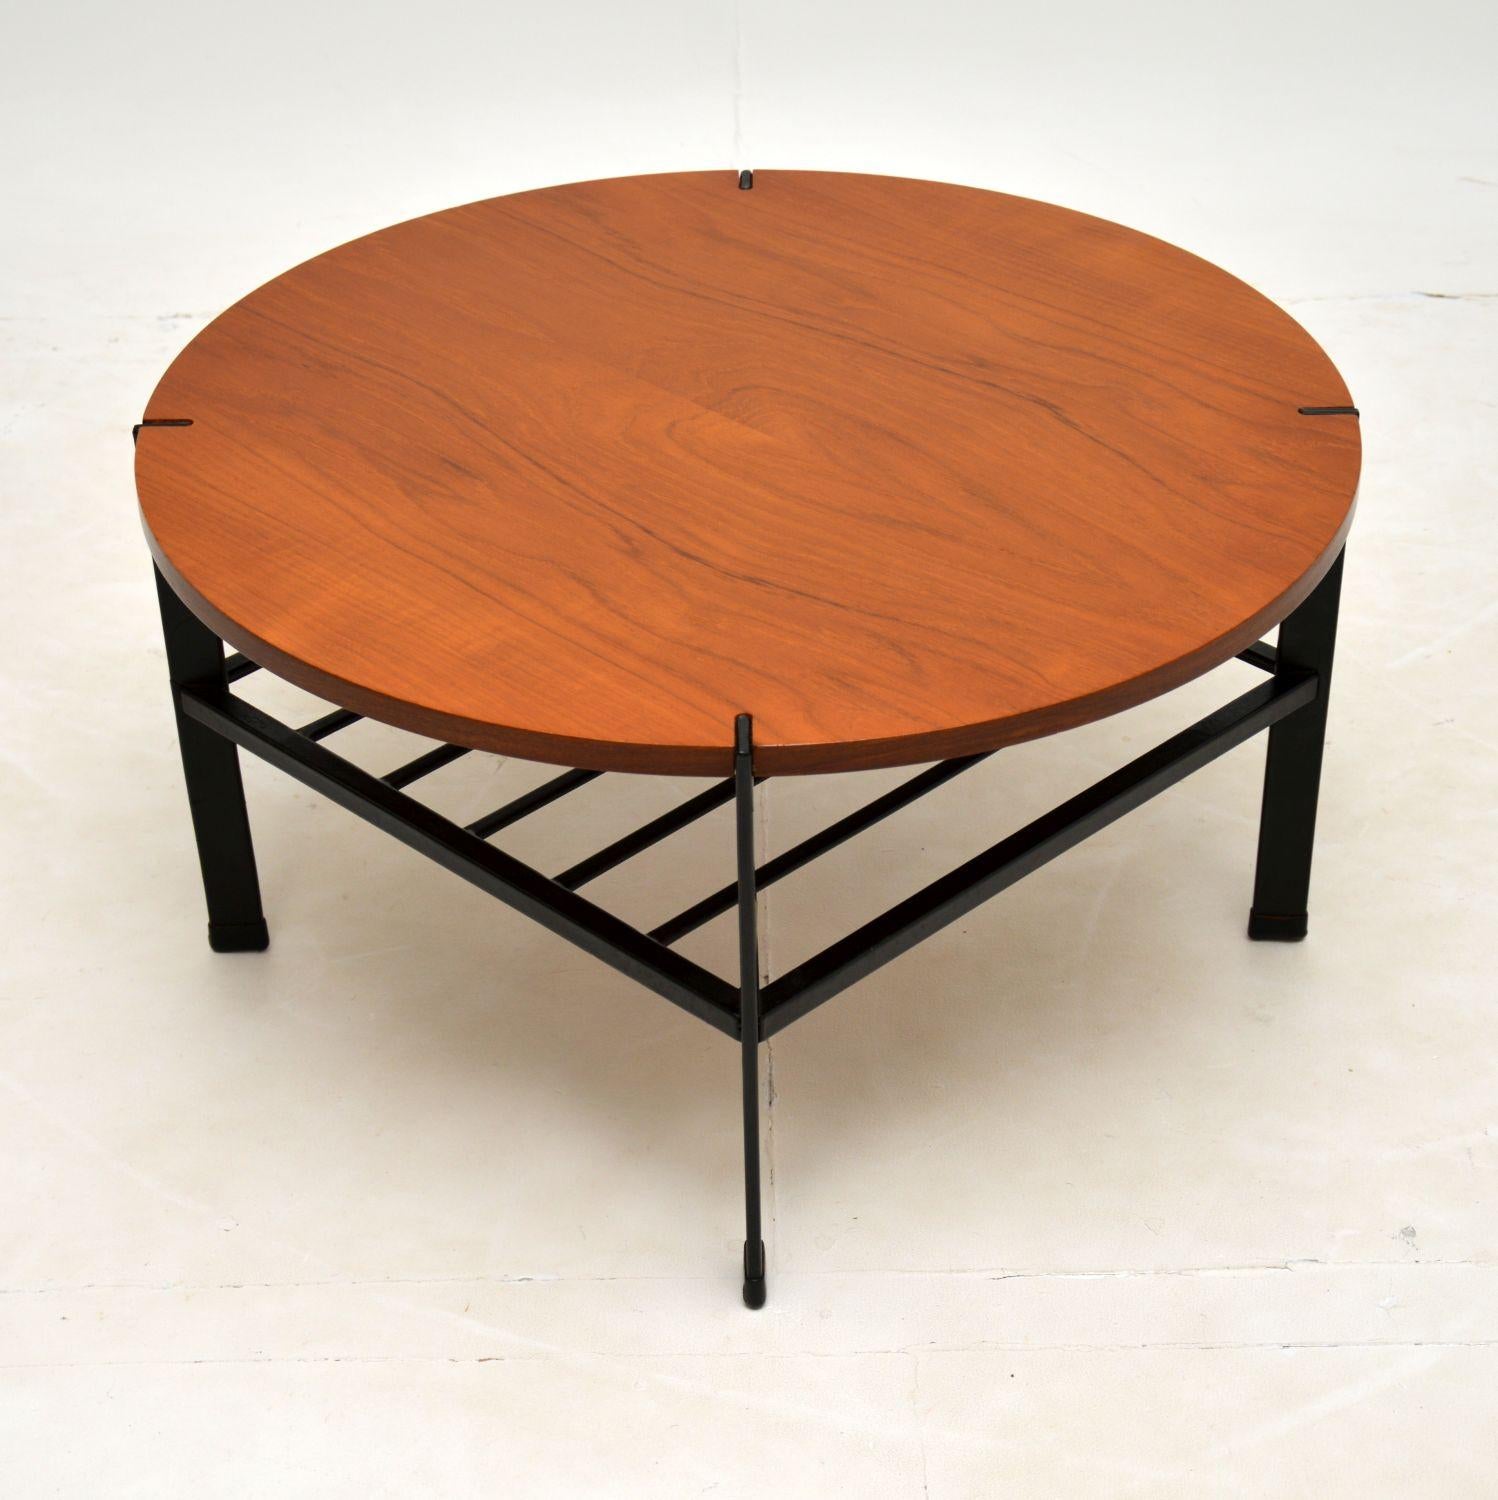 A lovely vintage coffee table in teak, with an ebonised steel base. This was made in England, it dates from the 1960-70’s.

The design is excellent, this has a circular teak top which is supported in an interesting way, the flat metal legs